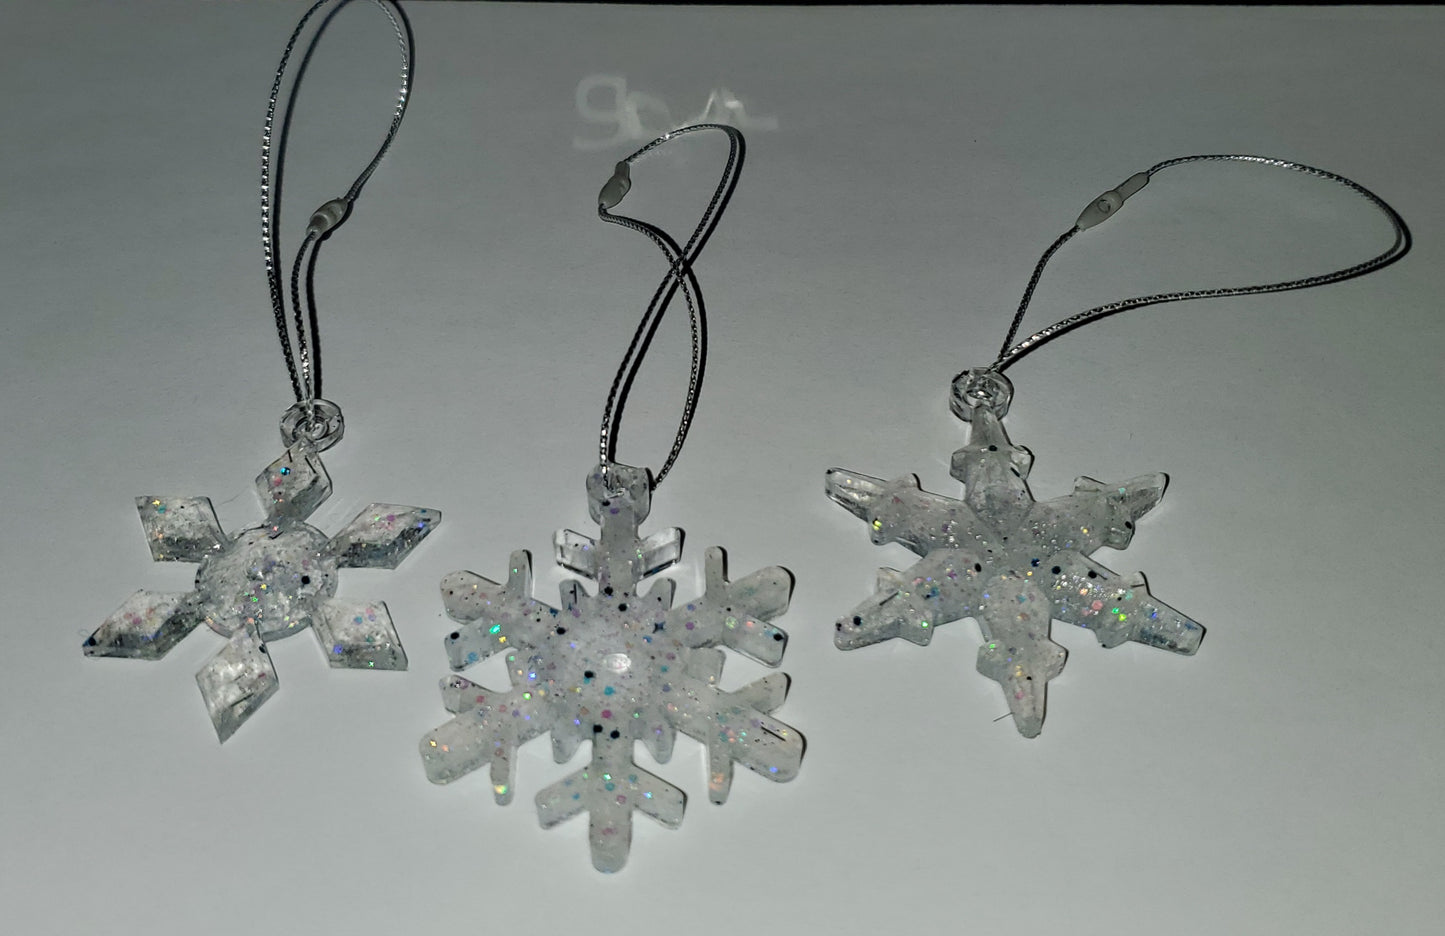 Frosted Ice Snowflake Ornament Set